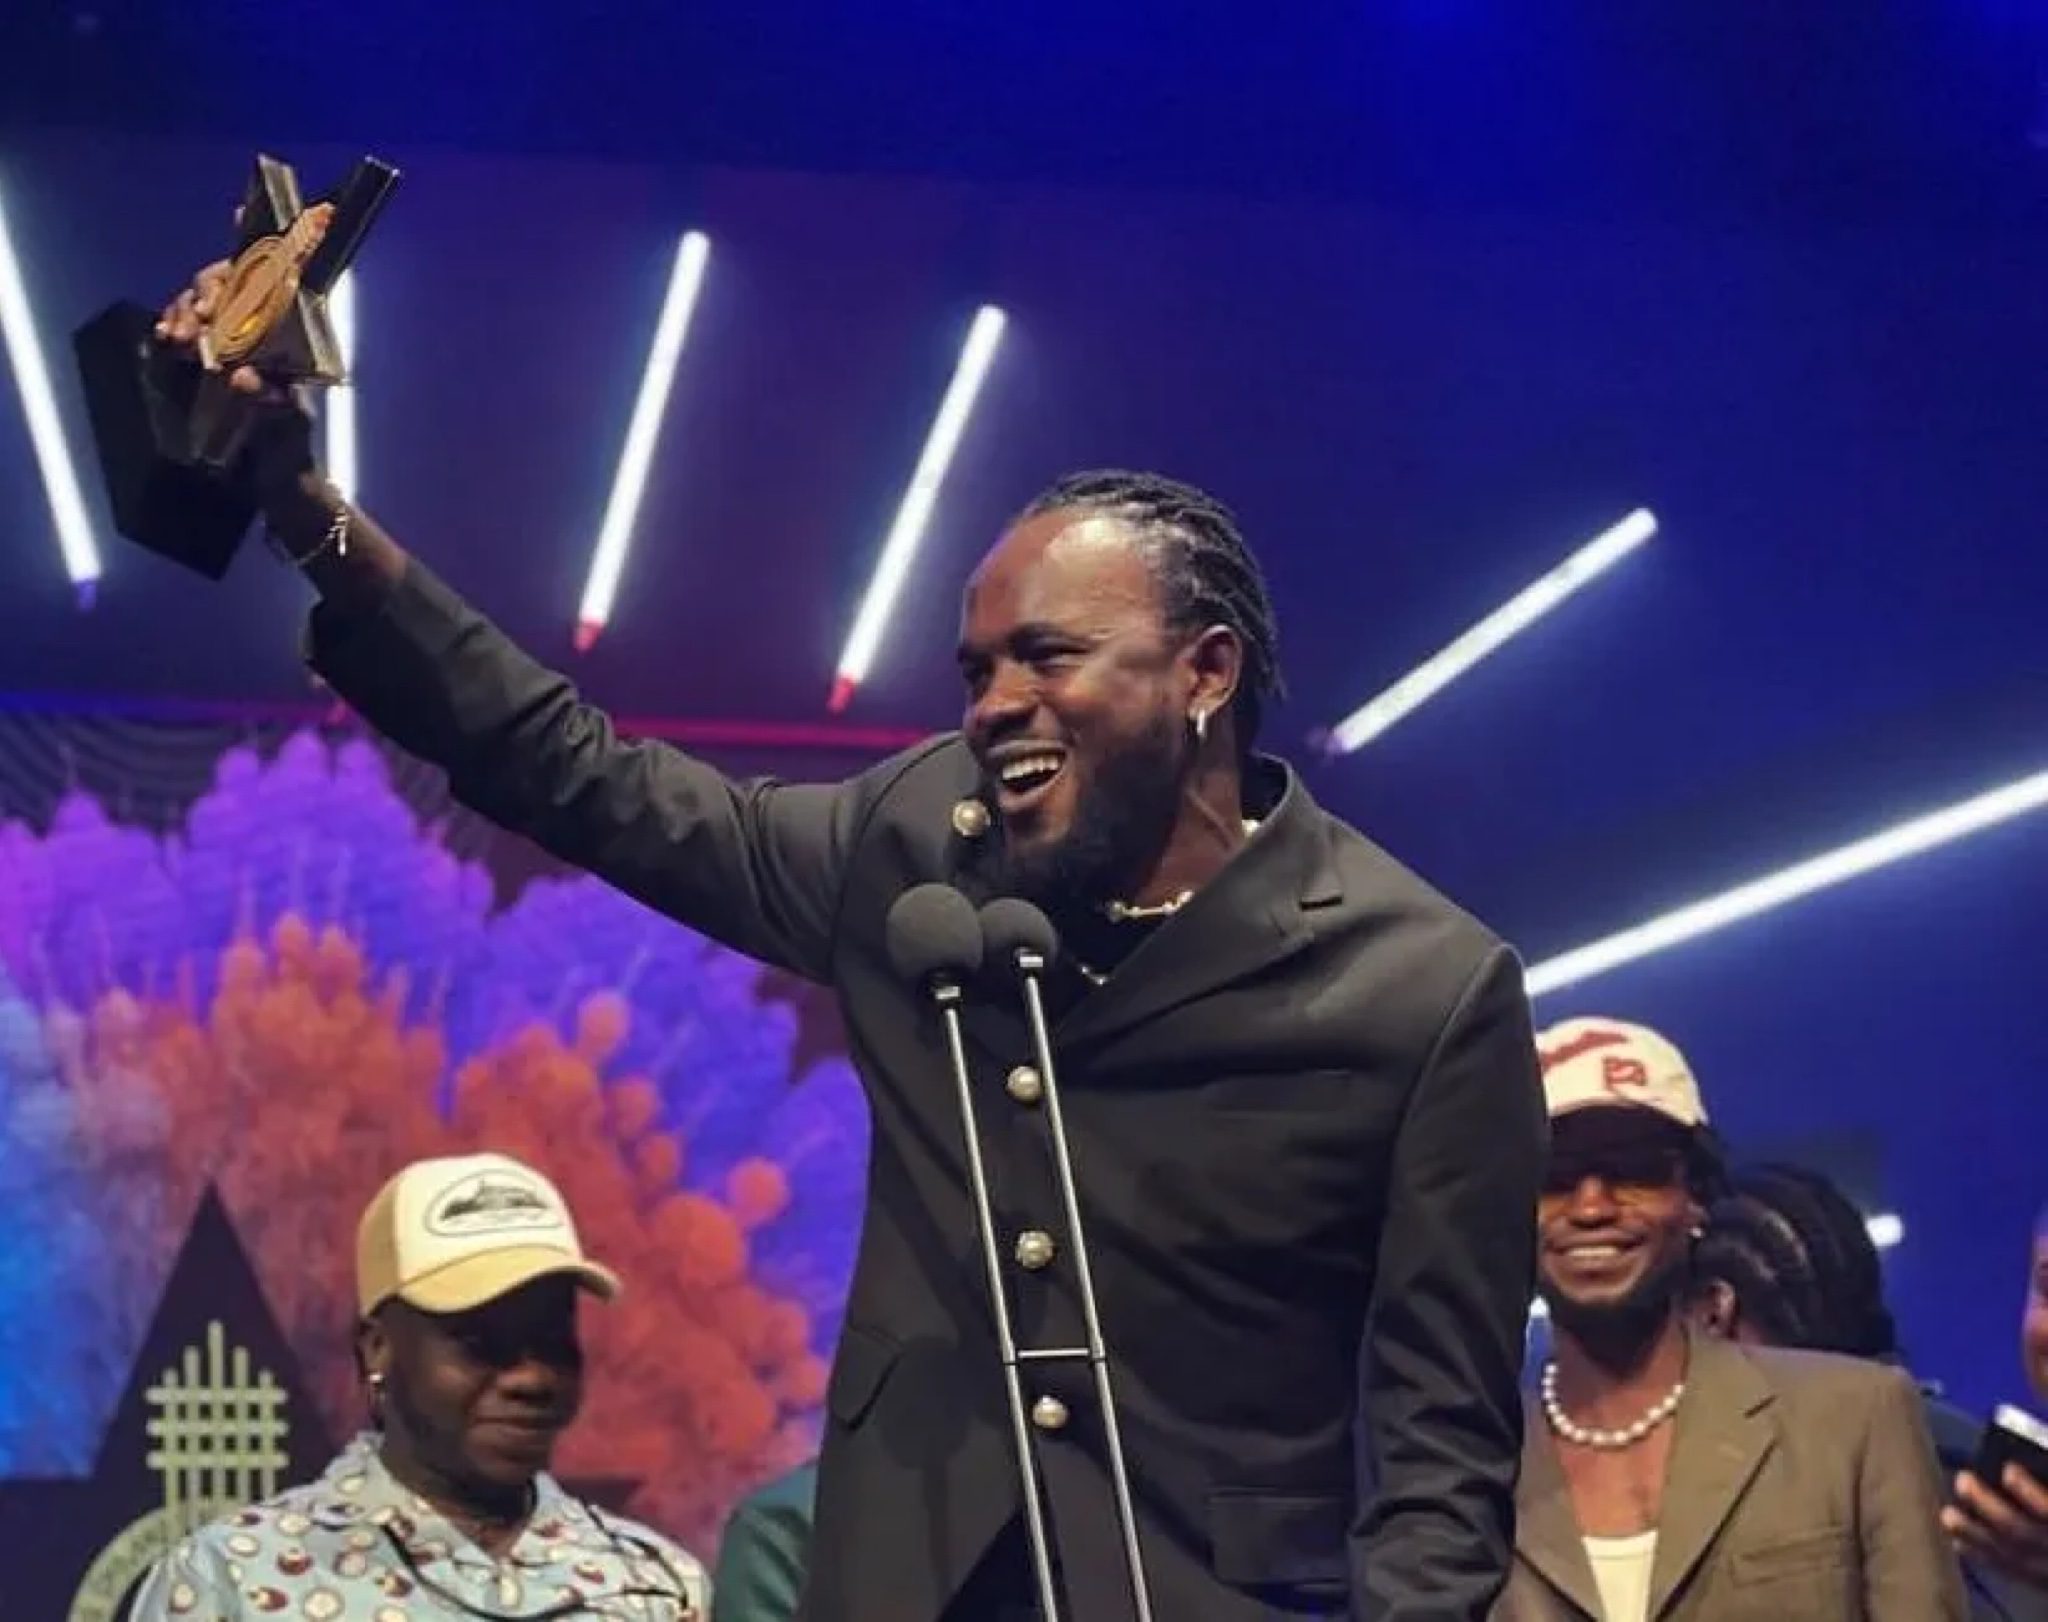 Black Sherif has been nominated for the Artiste of the Year at the 25th Telecel Ghana Music Awards